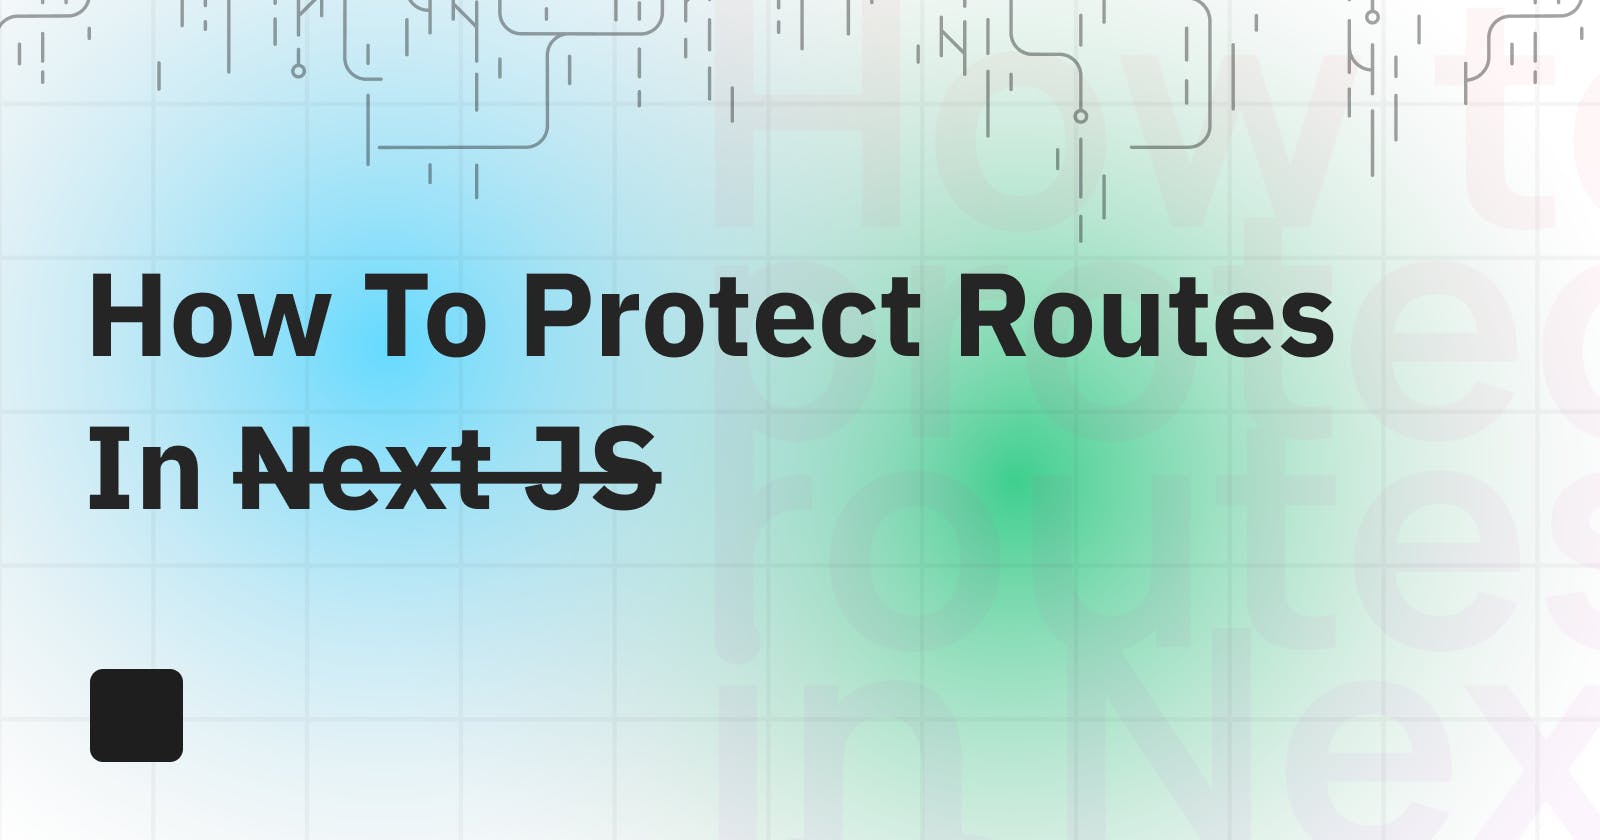 How to protect routes in Next JS